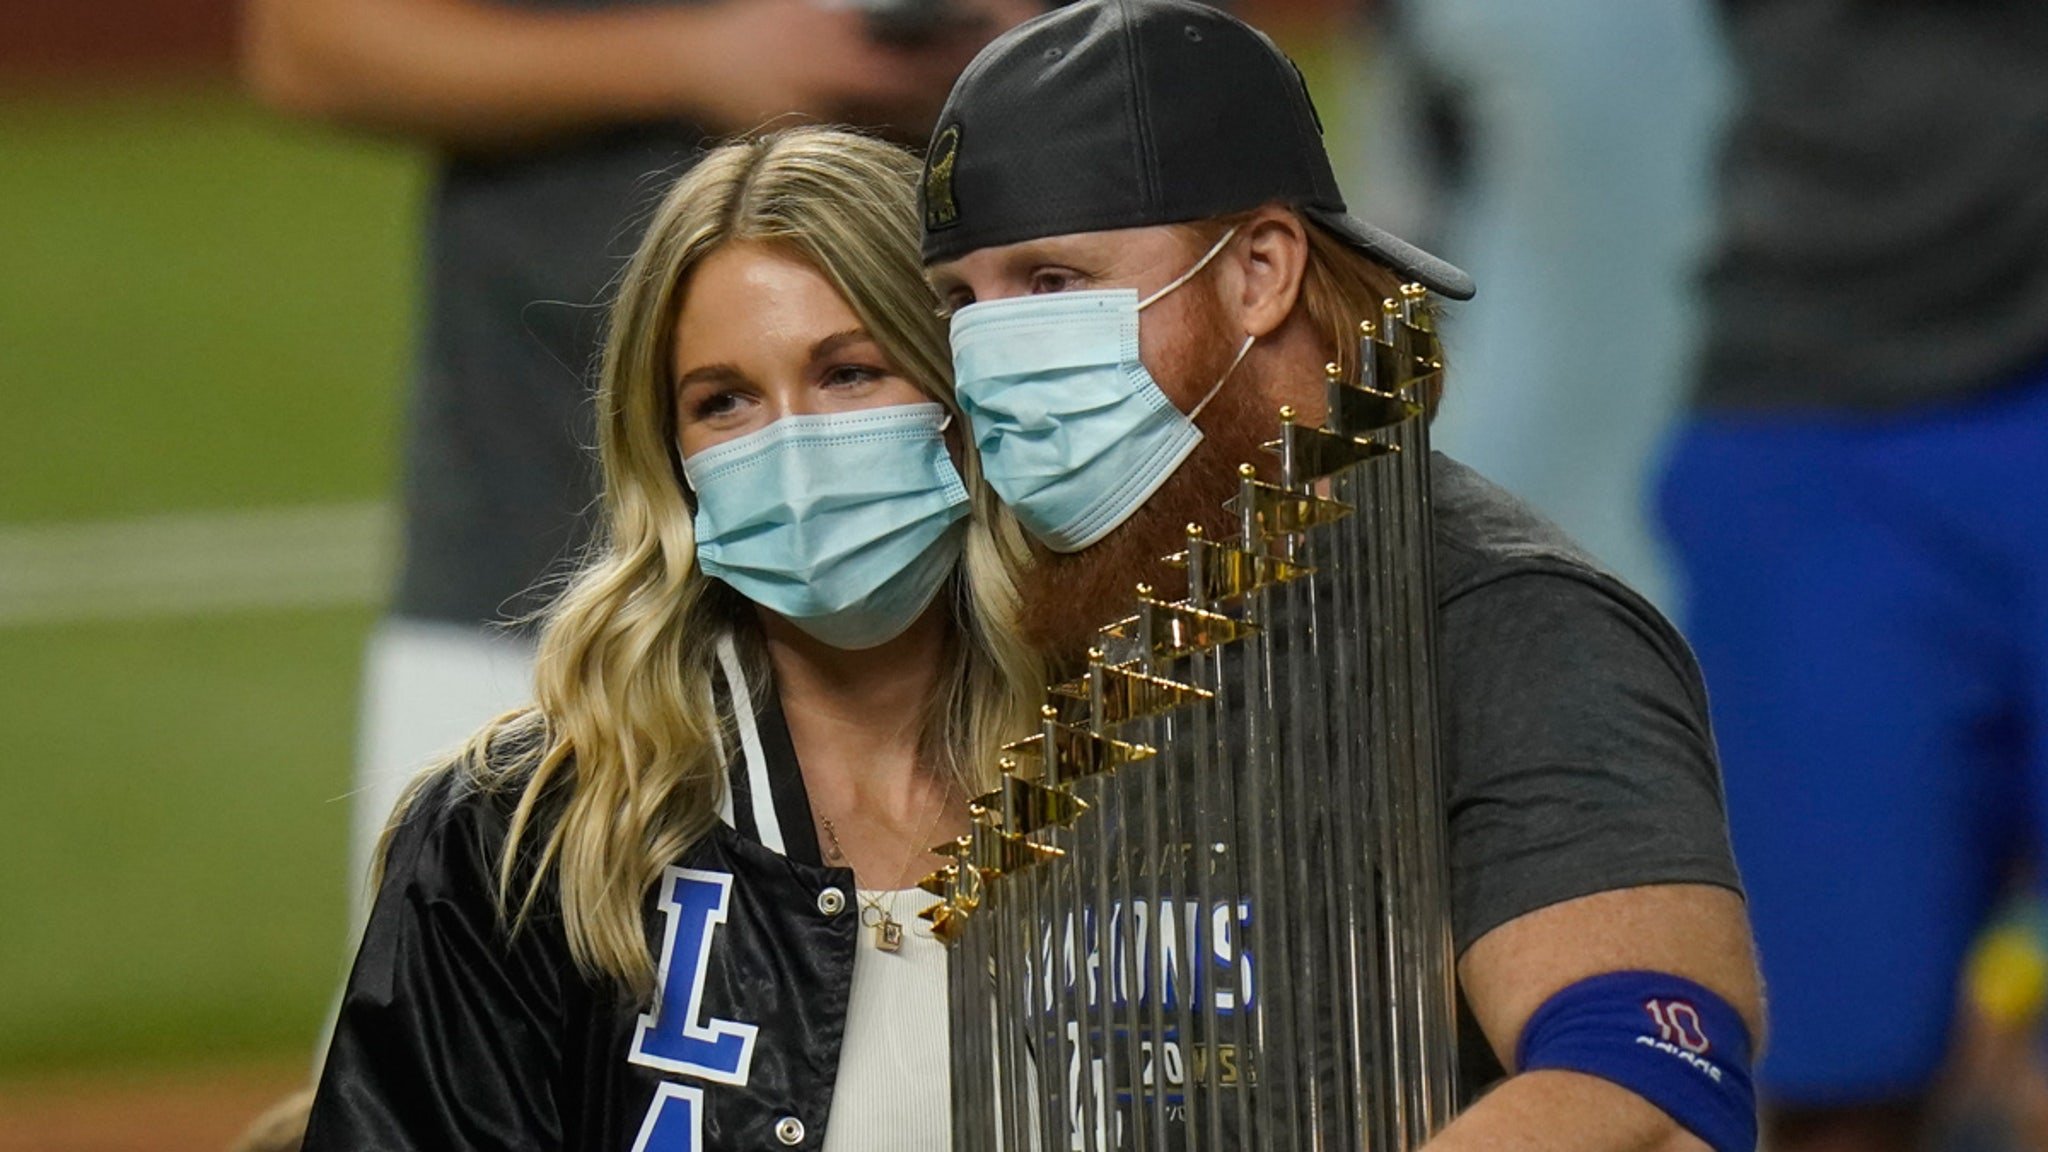 L.A. Dodgers World Series Champs!!! But Justin Turner Pulled After Positive COVID Test